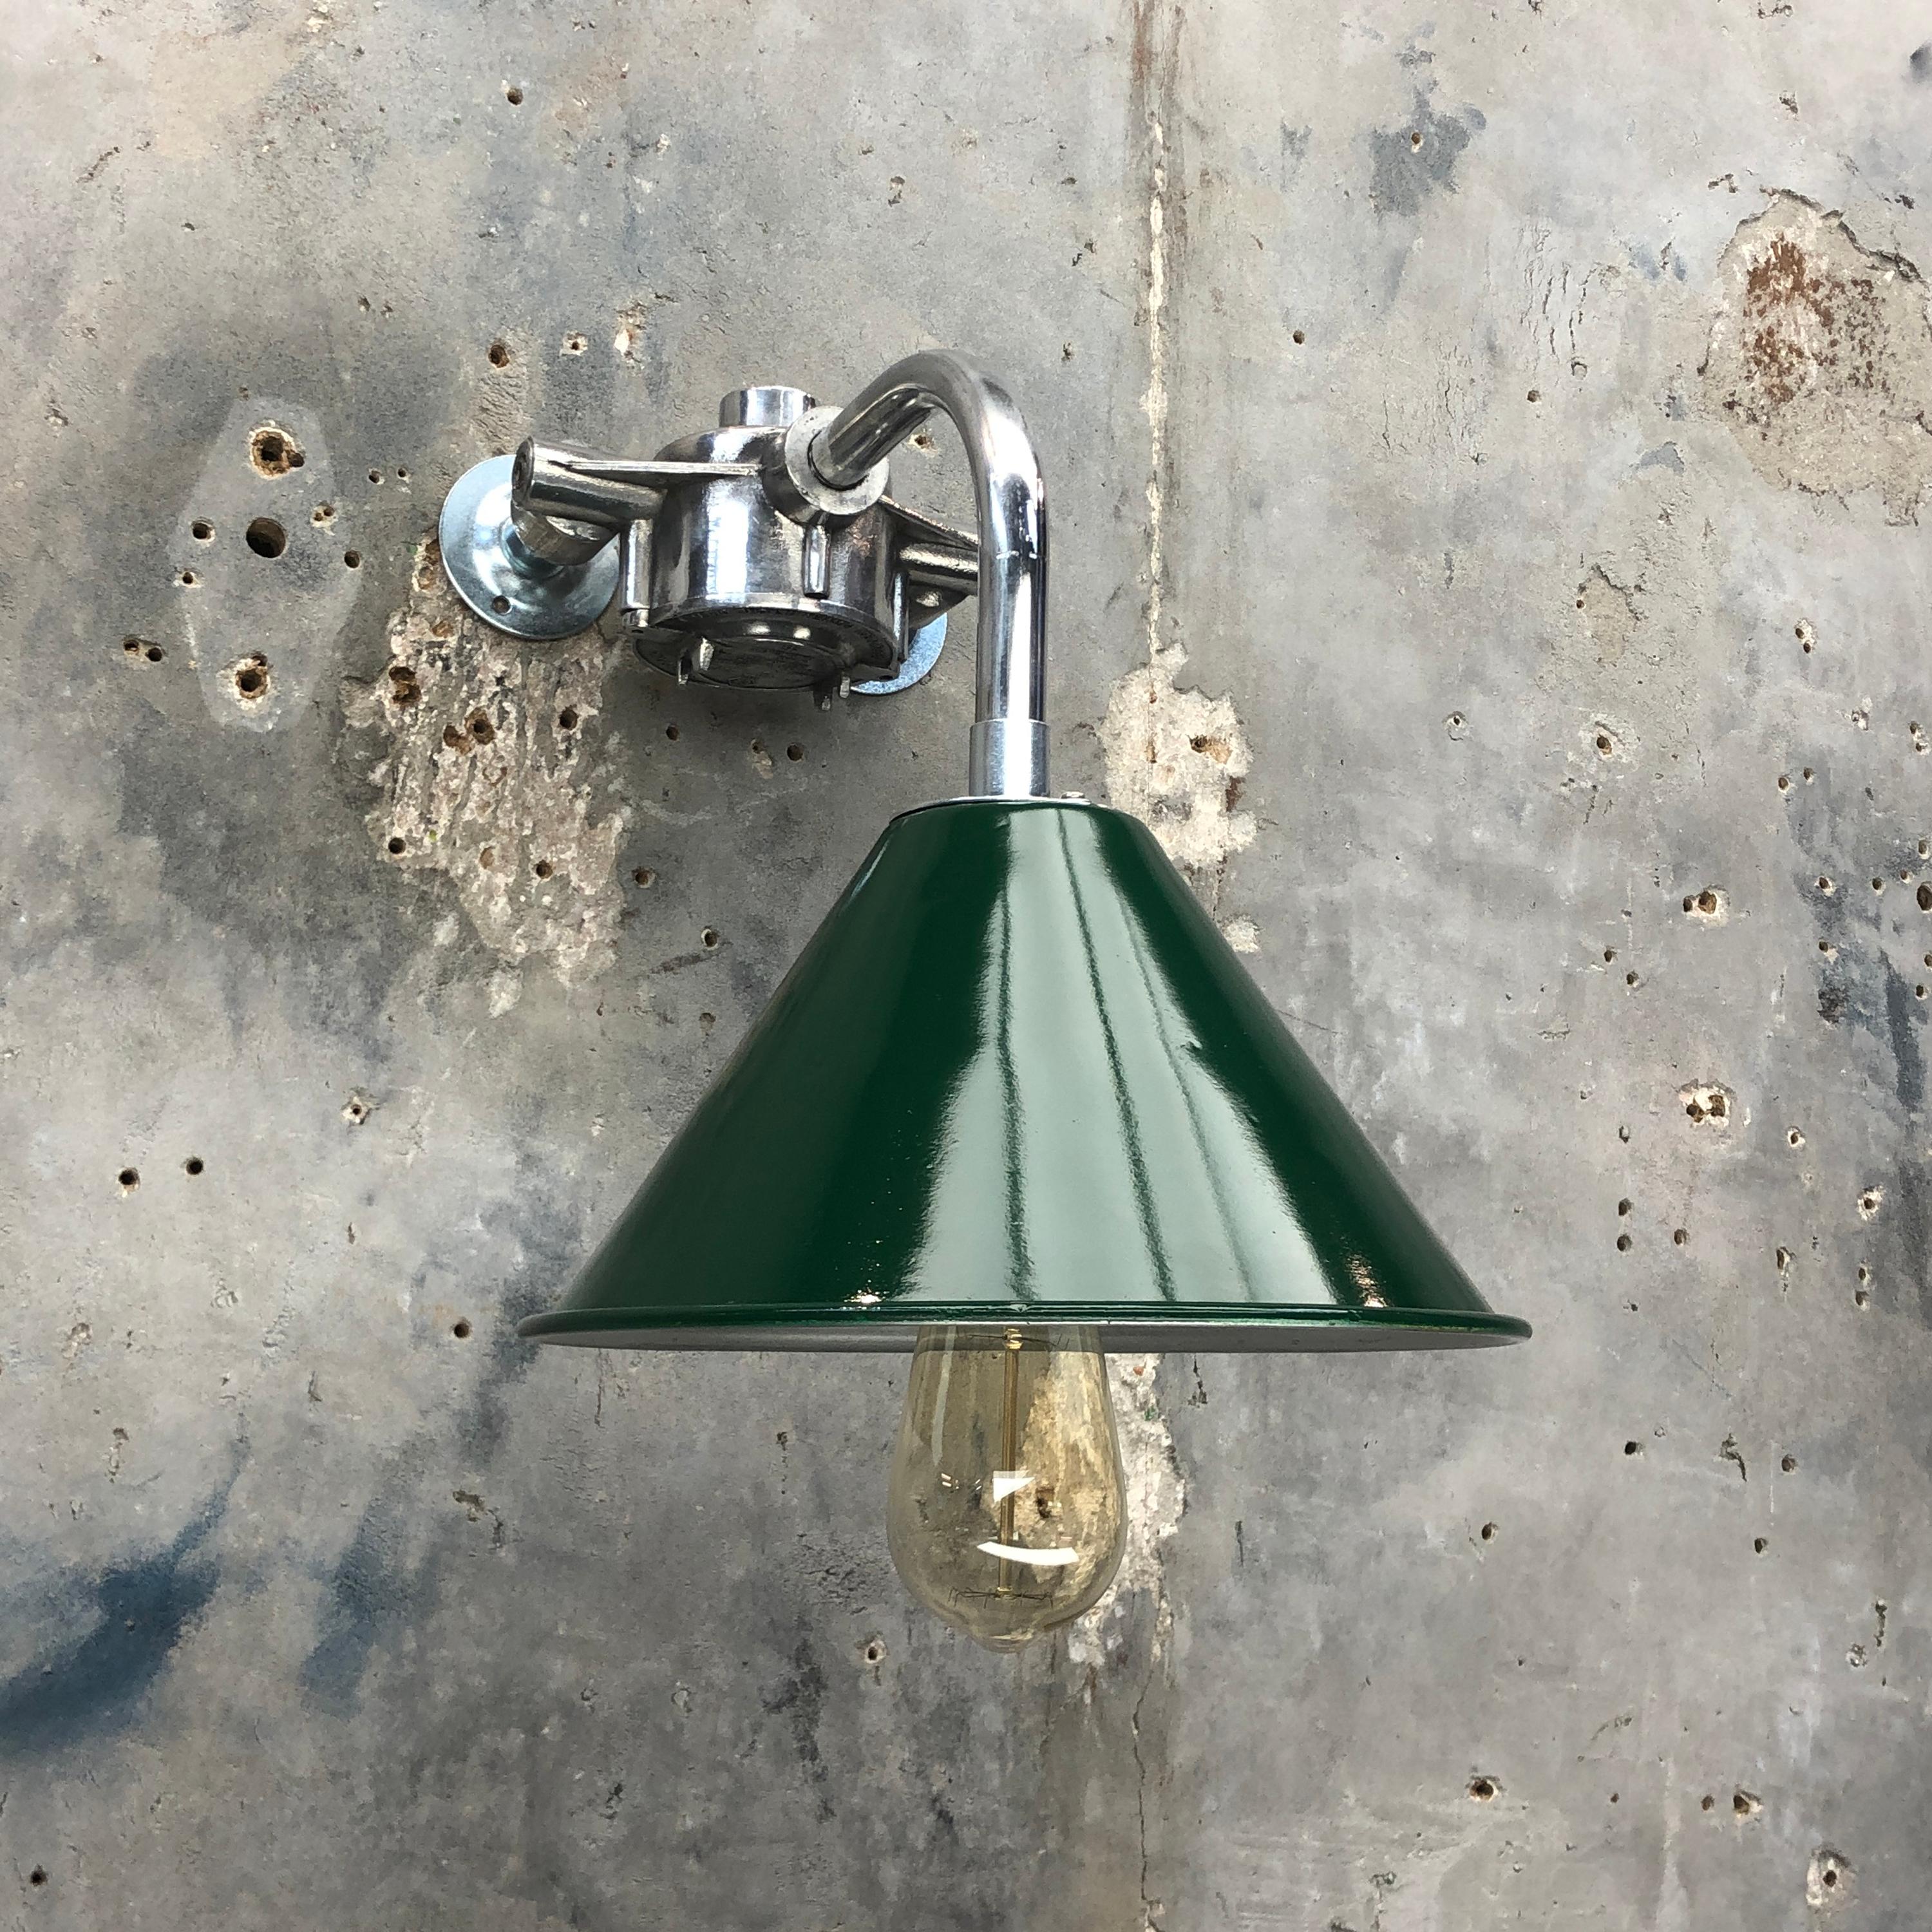 Spun 1980s Ex British Army Lamp Shade and Galvanized Steel Short Reach Cantilever For Sale